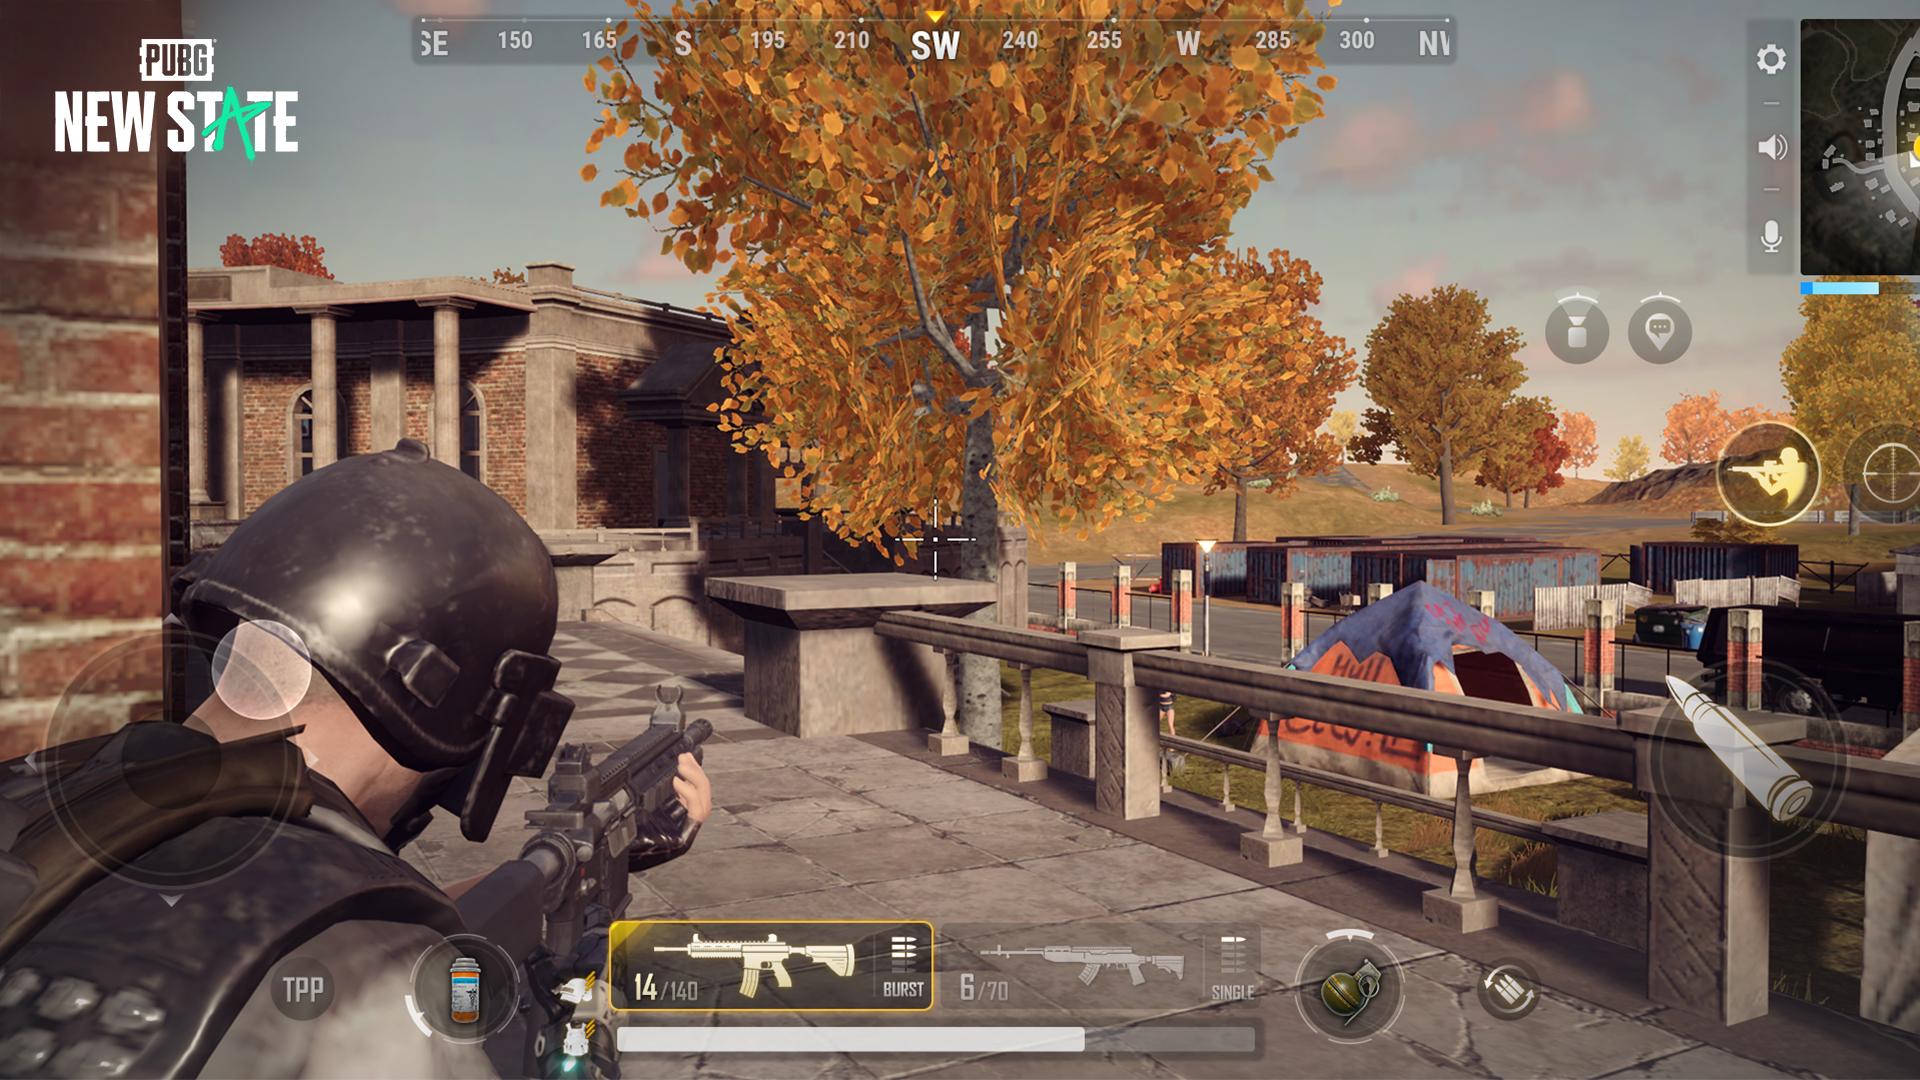 How To PUBG New State APK Download? - A Guide For Android Users